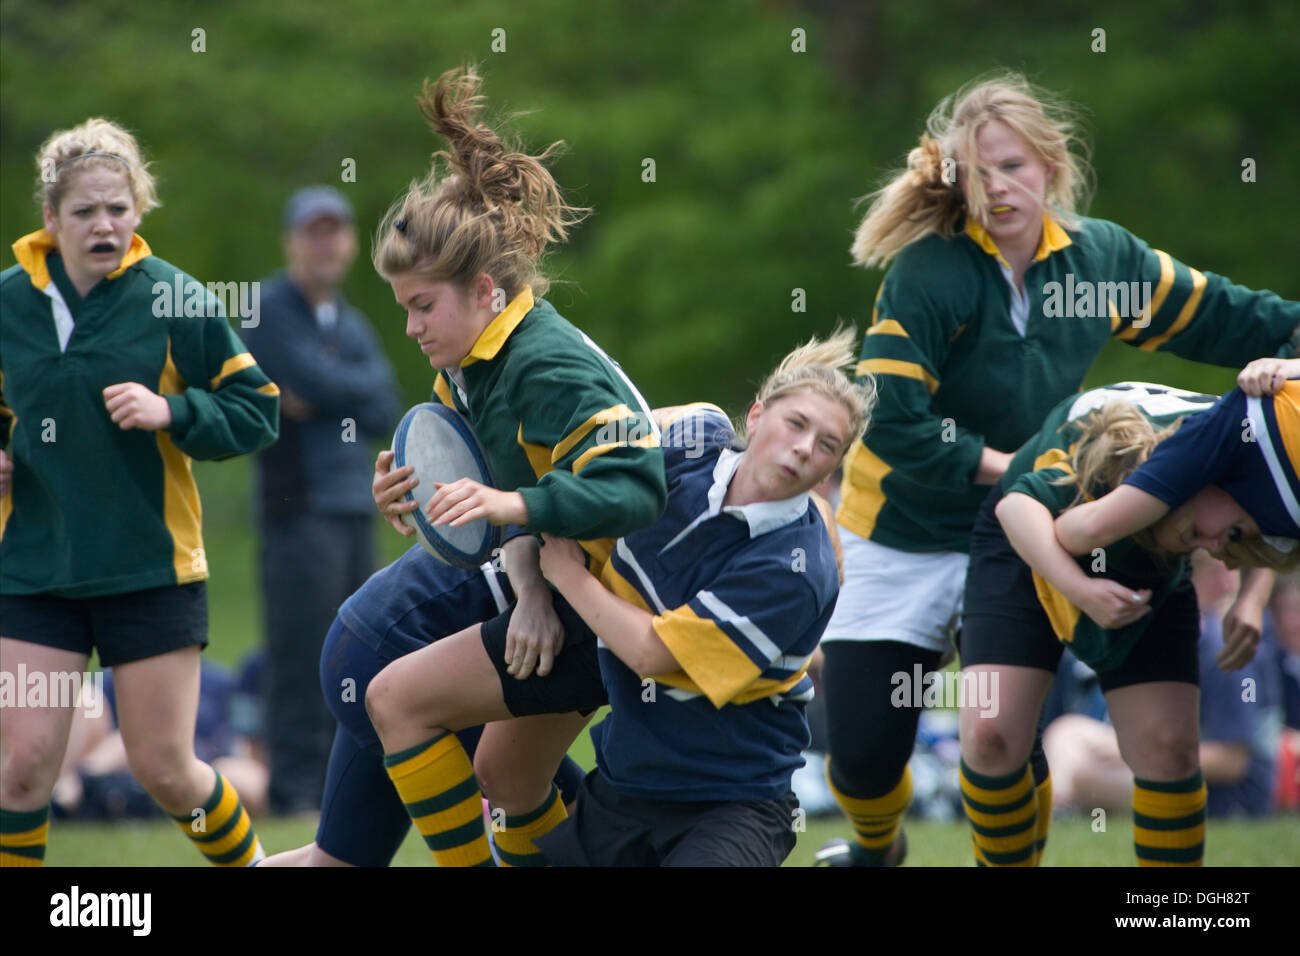 girl being tackled in rugby game Stock Photo